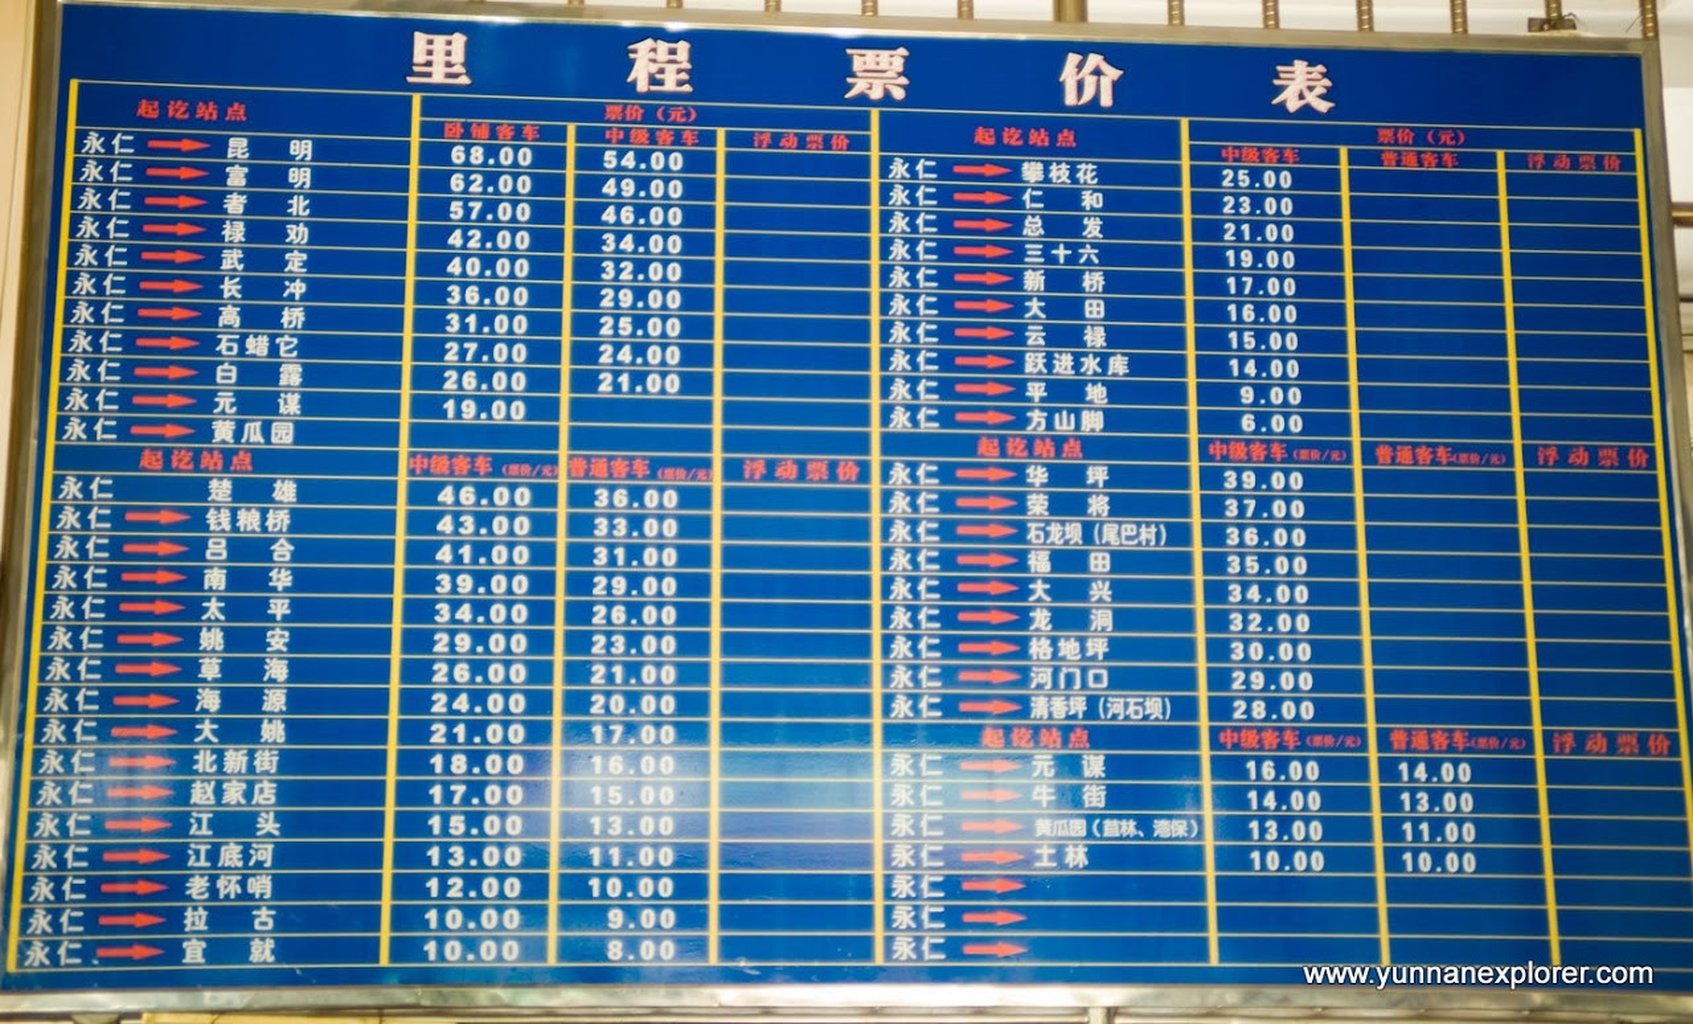 Picture: Frequent transport to Kunming, Yuanmou, Chuxiong and Panzhihua. Local transport is not as frequent as the posted time-tables indicate. 